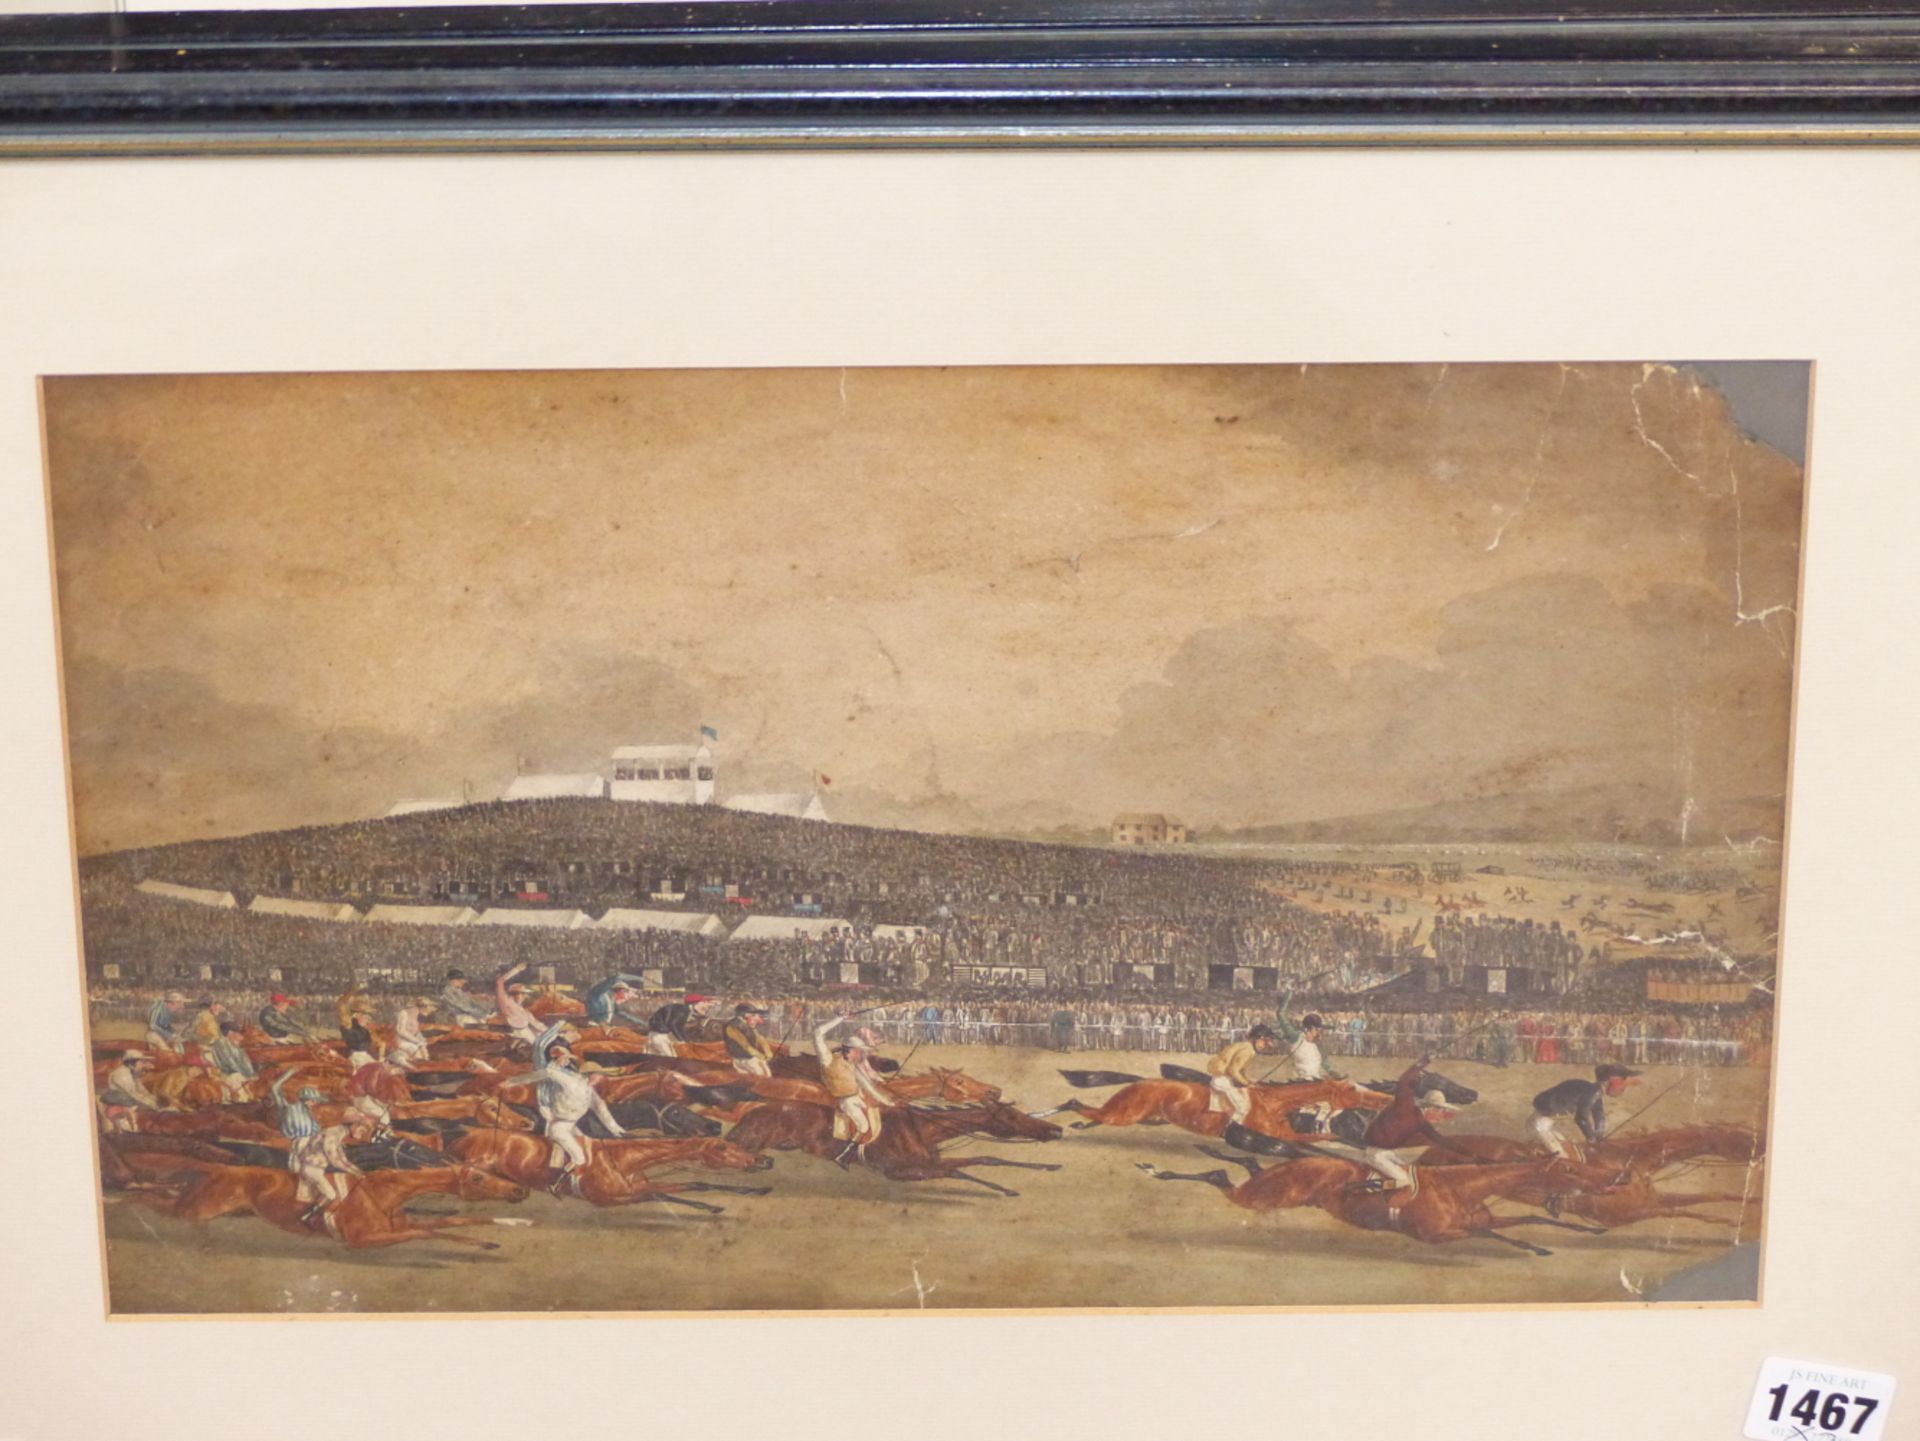 19th C. ENGLISH SCHOOL DANIEL O'ROUKE WINNING HE DERBY 1852, REPUTEDLY BY JAMES G. NOBLE, - Image 8 of 26